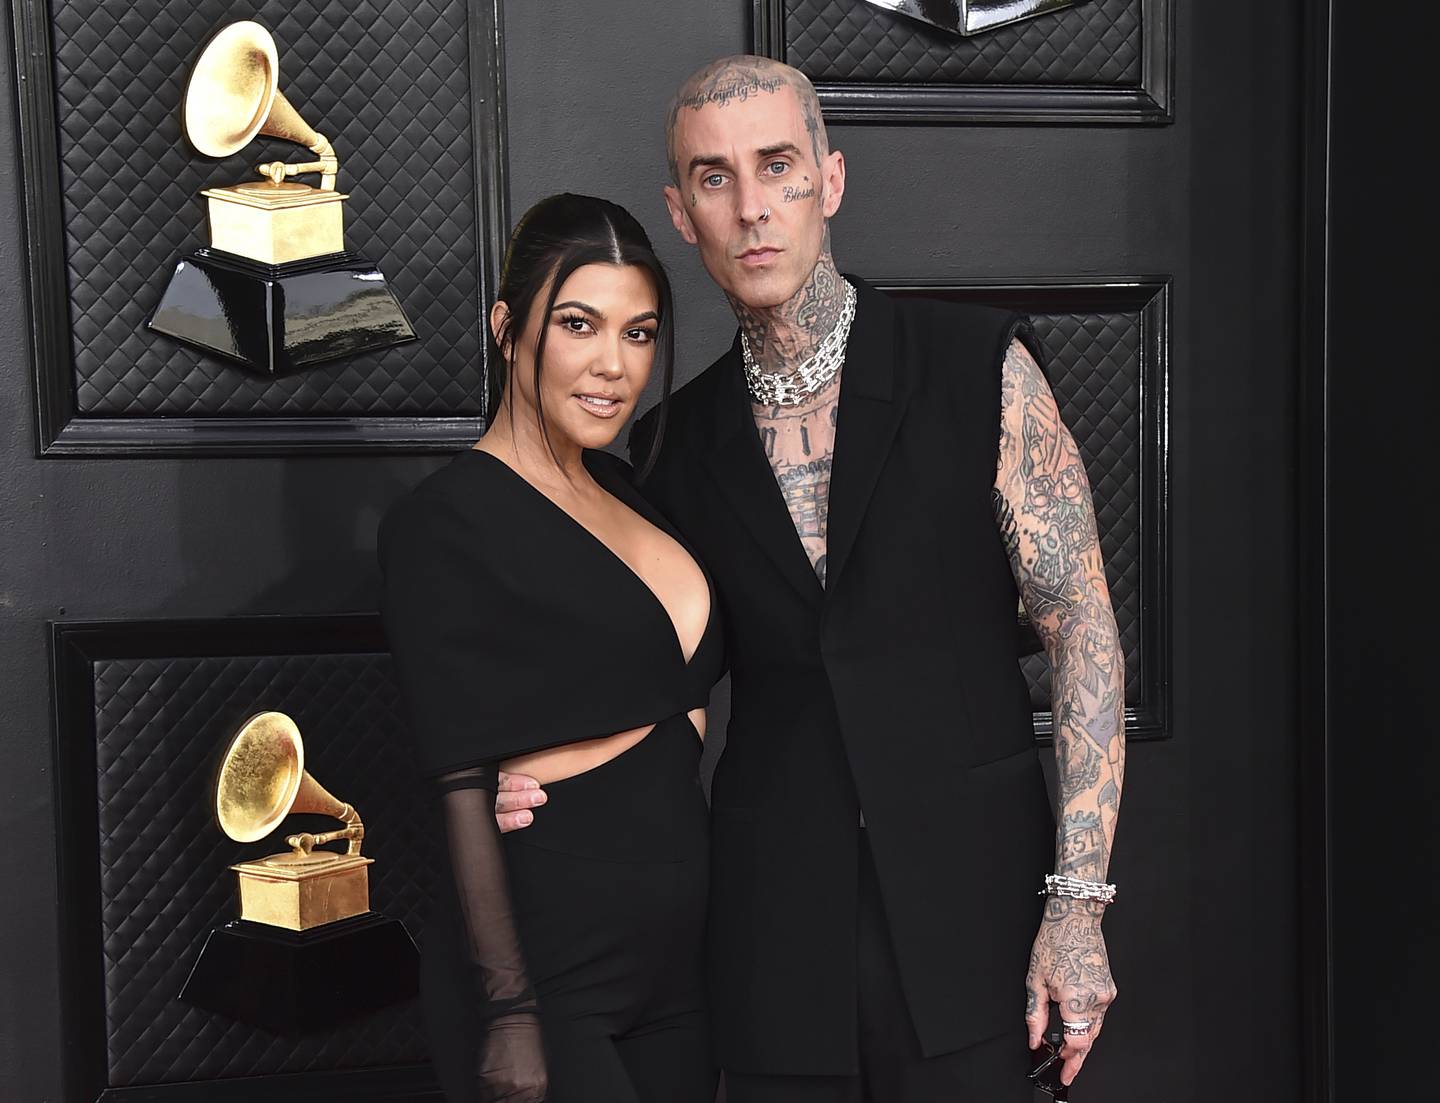 Travis Barker and Kourtney Kardashian began dating in 2020 and married in 2022. Barker's ex-wife has now opened up about how it's affected her relationship with her kids. Photo / Jordan Strauss, Invision via AP